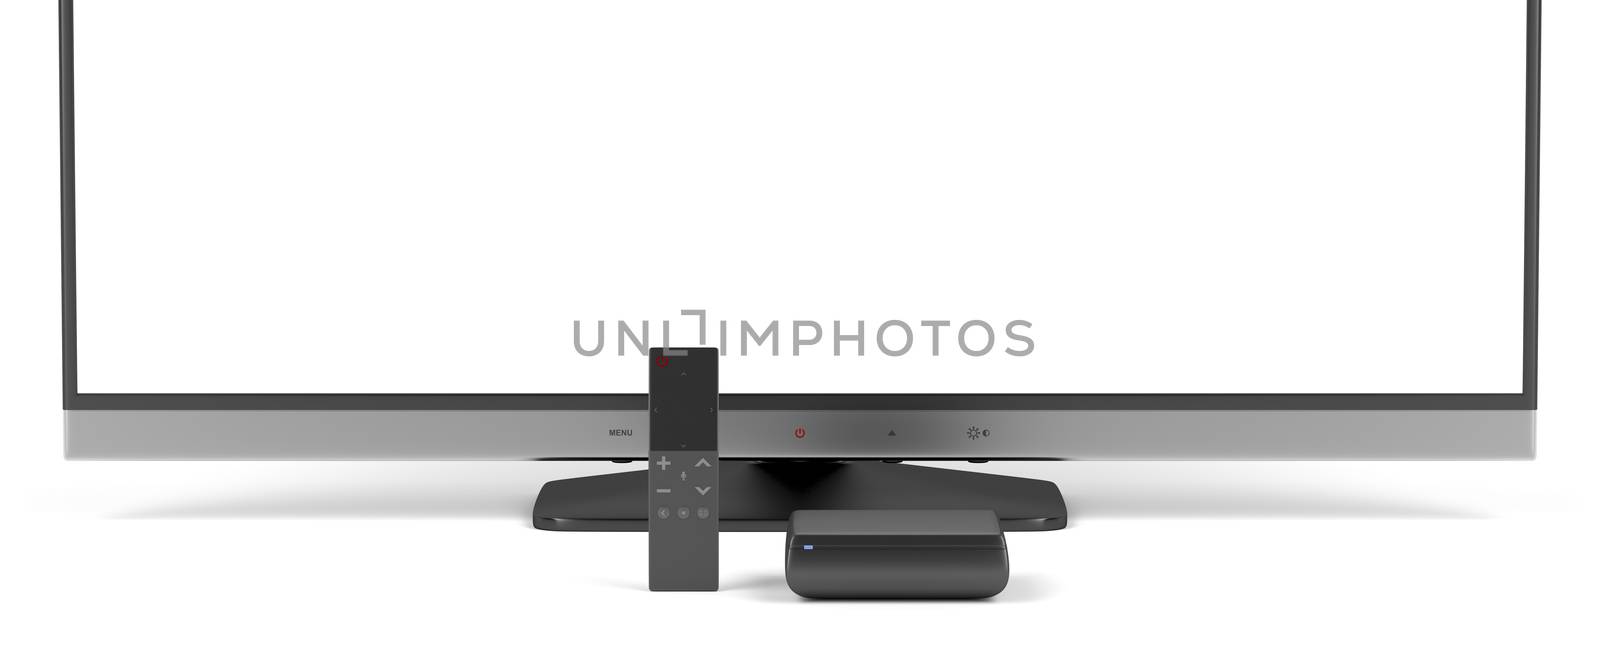 Tv, media player and remote control by magraphics